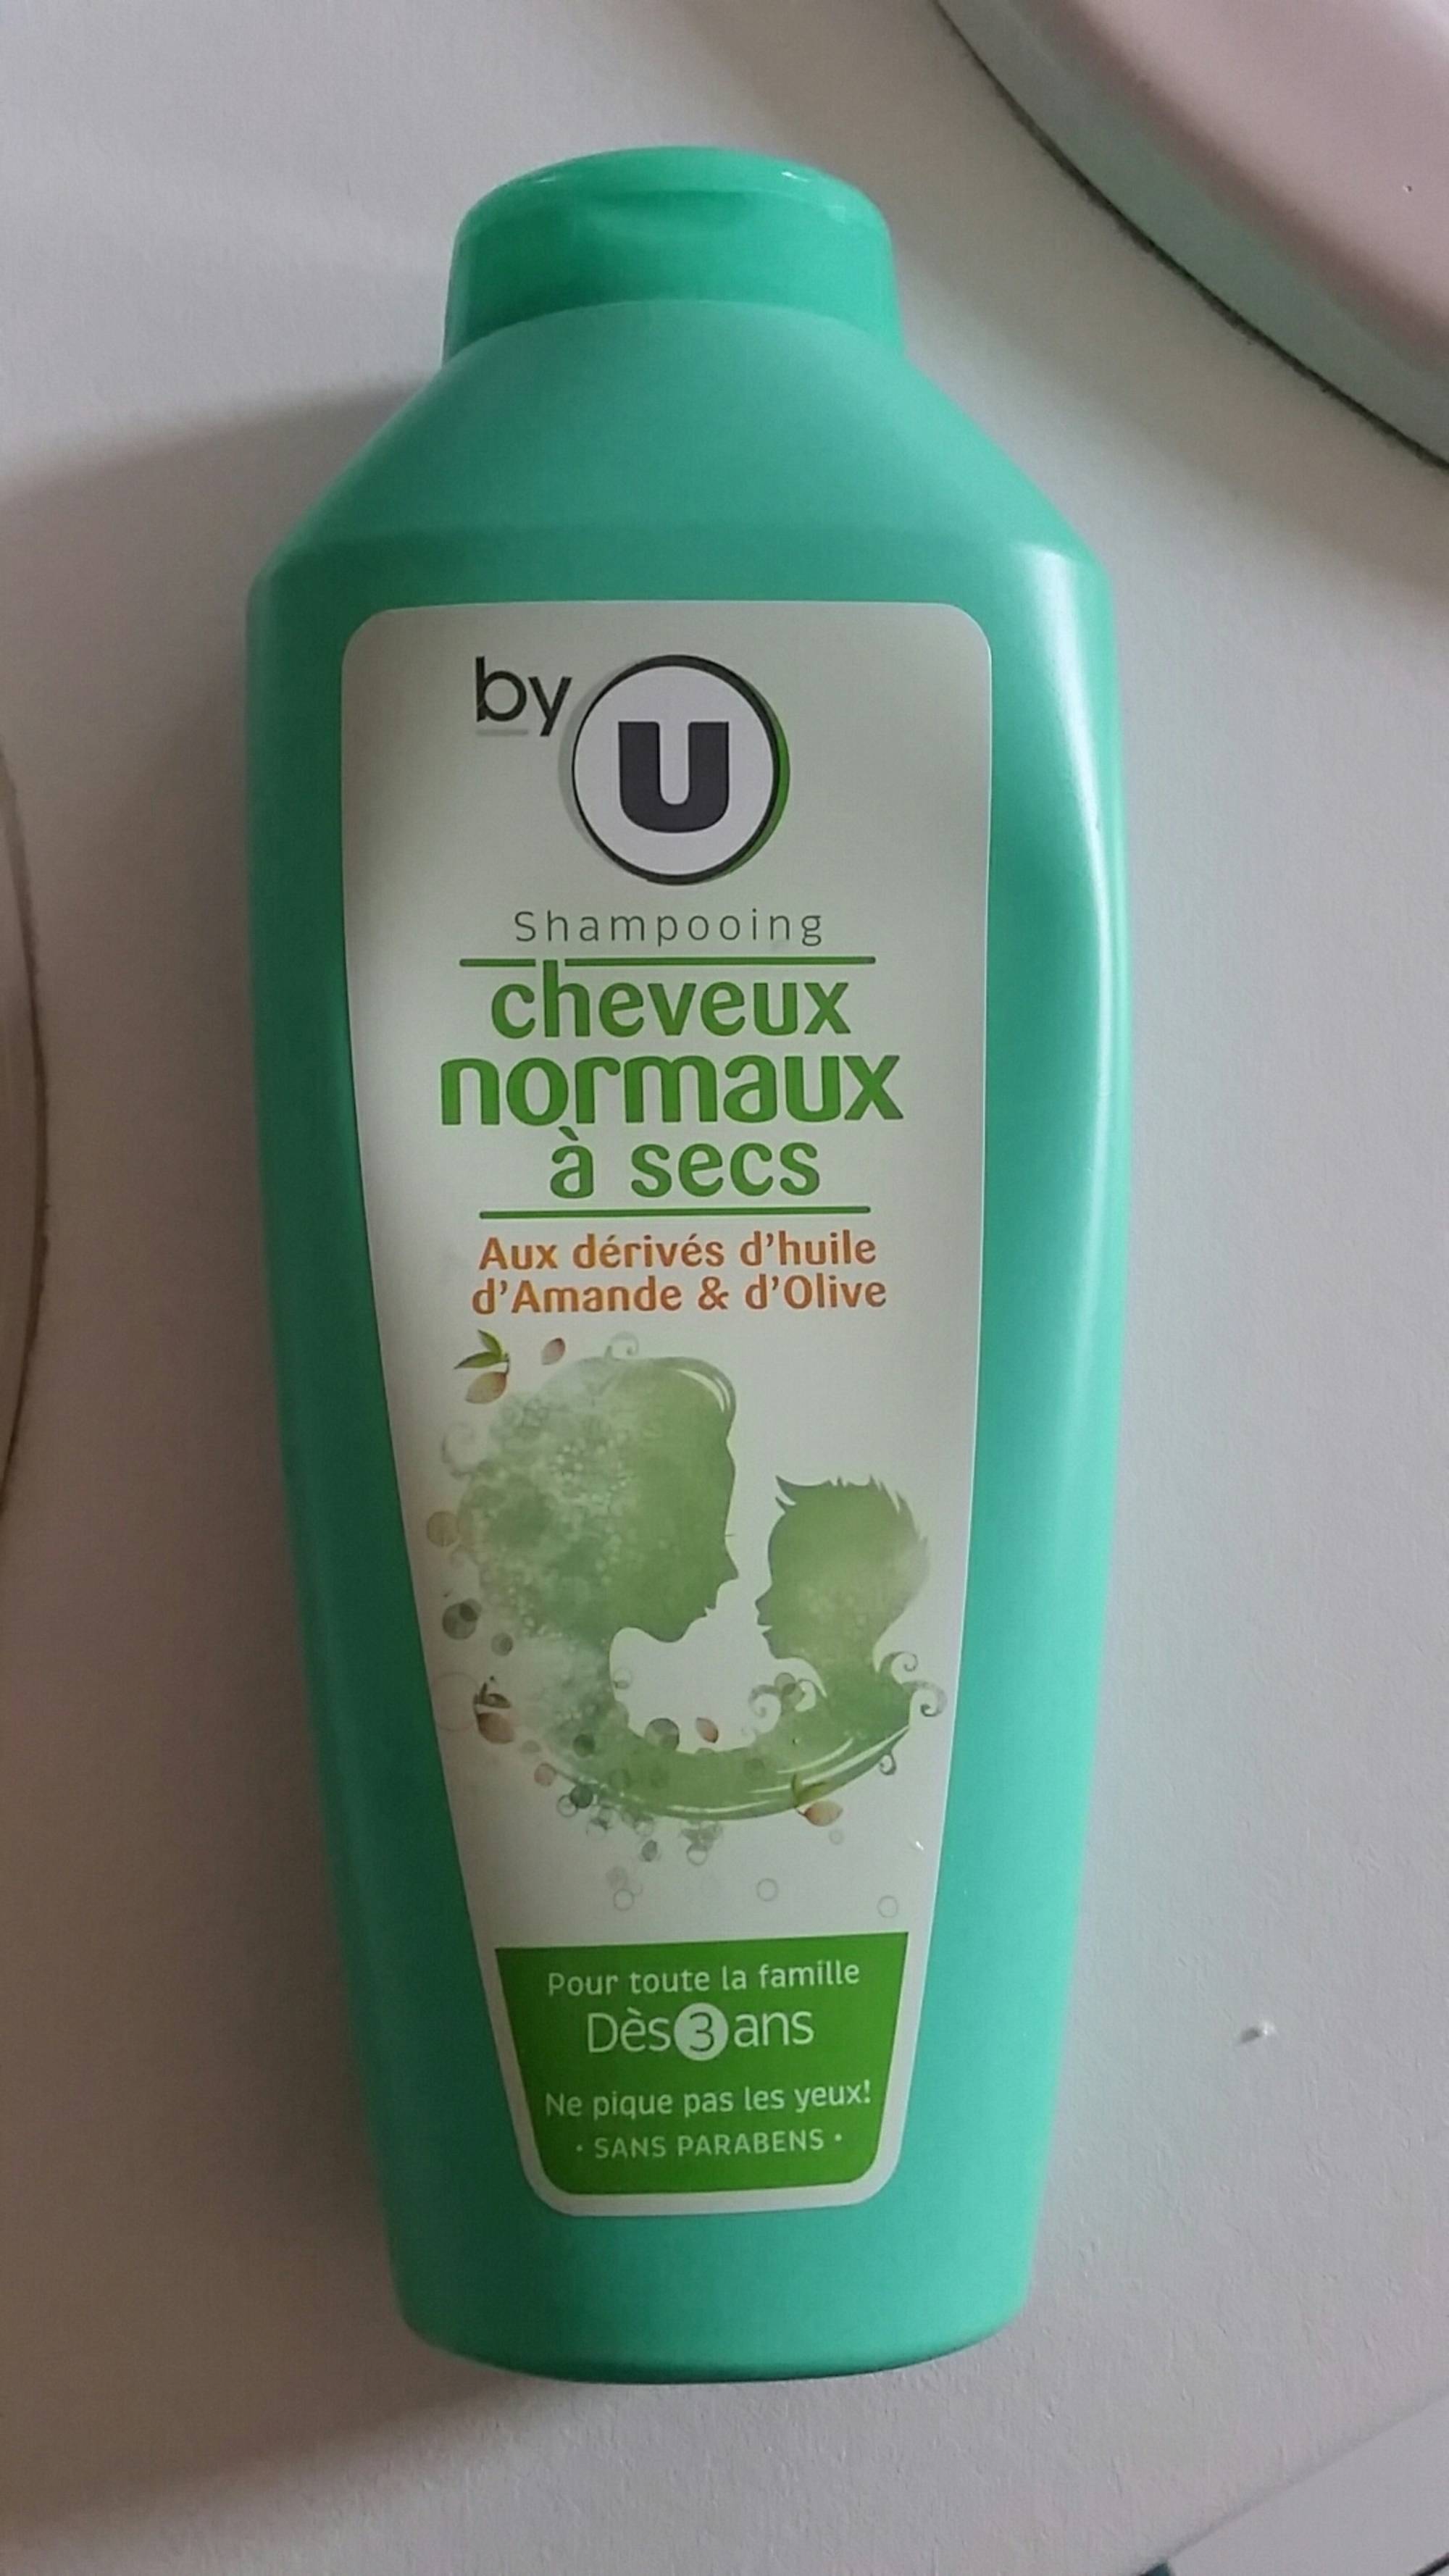 BY U - Shampooing - Cheveux normaux à secs